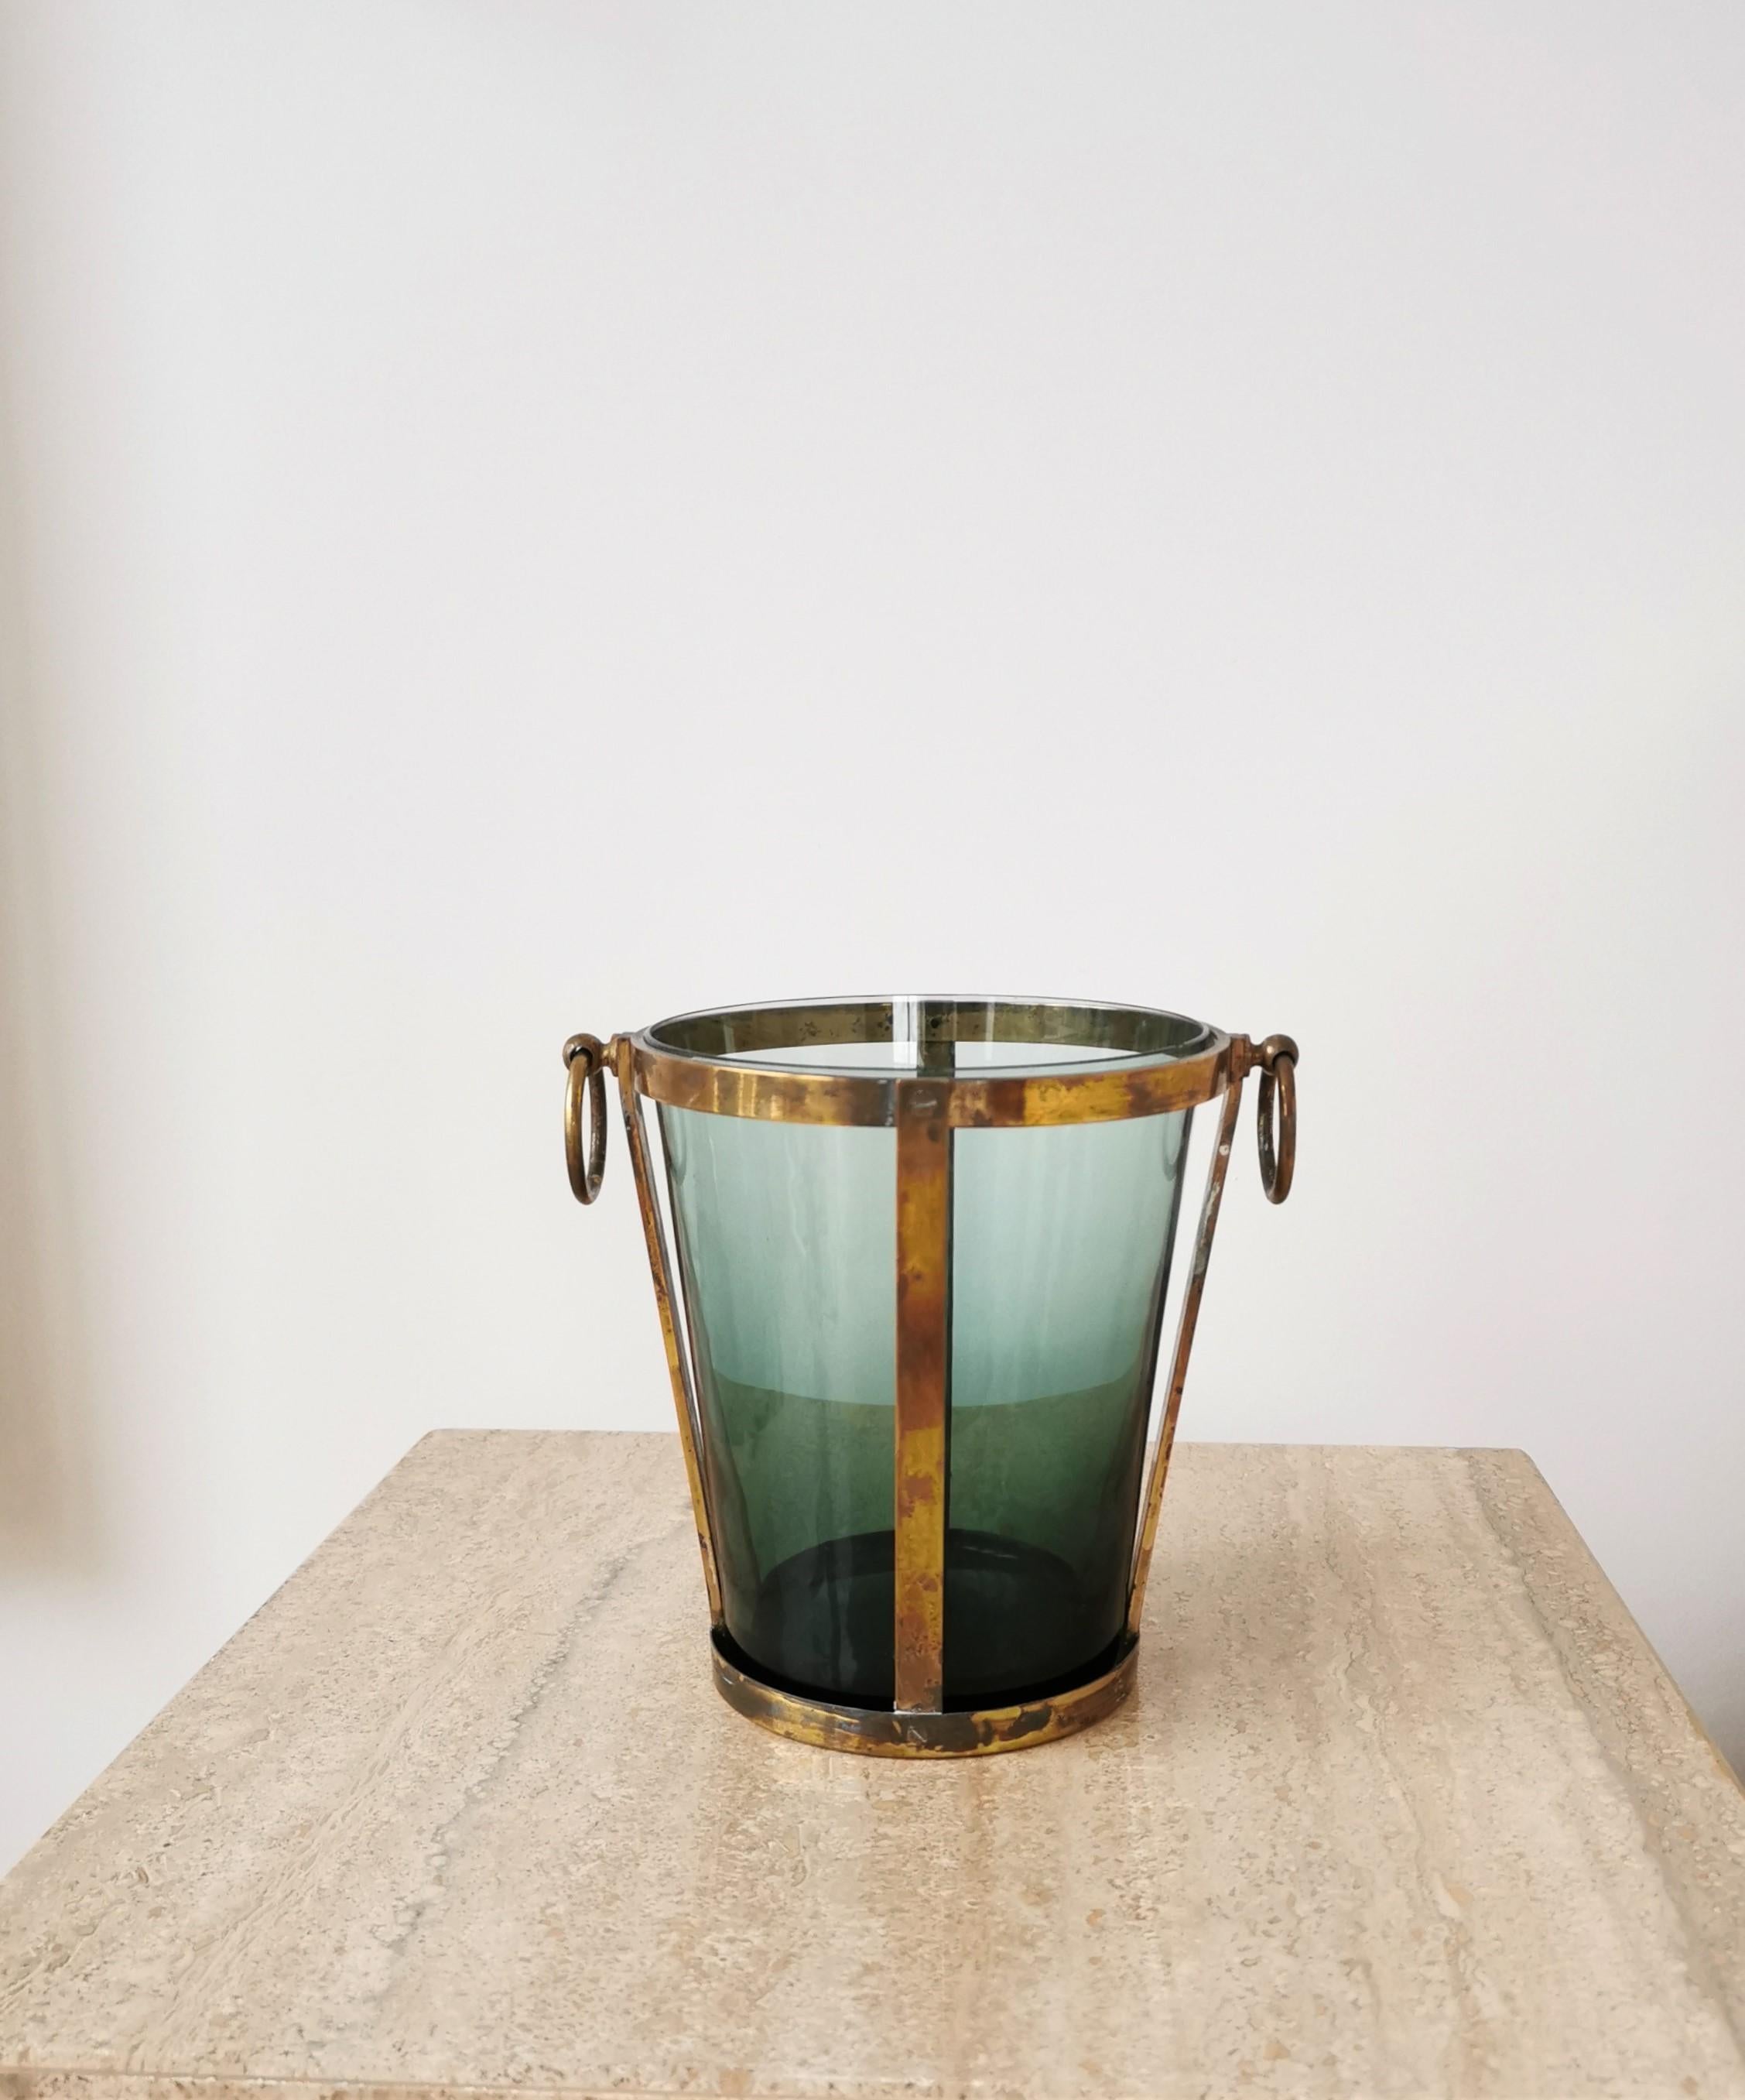 Patinated brass
Blue green glass container
will ship from Paris
Price does not include shipping nor possible customs related charges
can be returned to either Paris or NYC location.